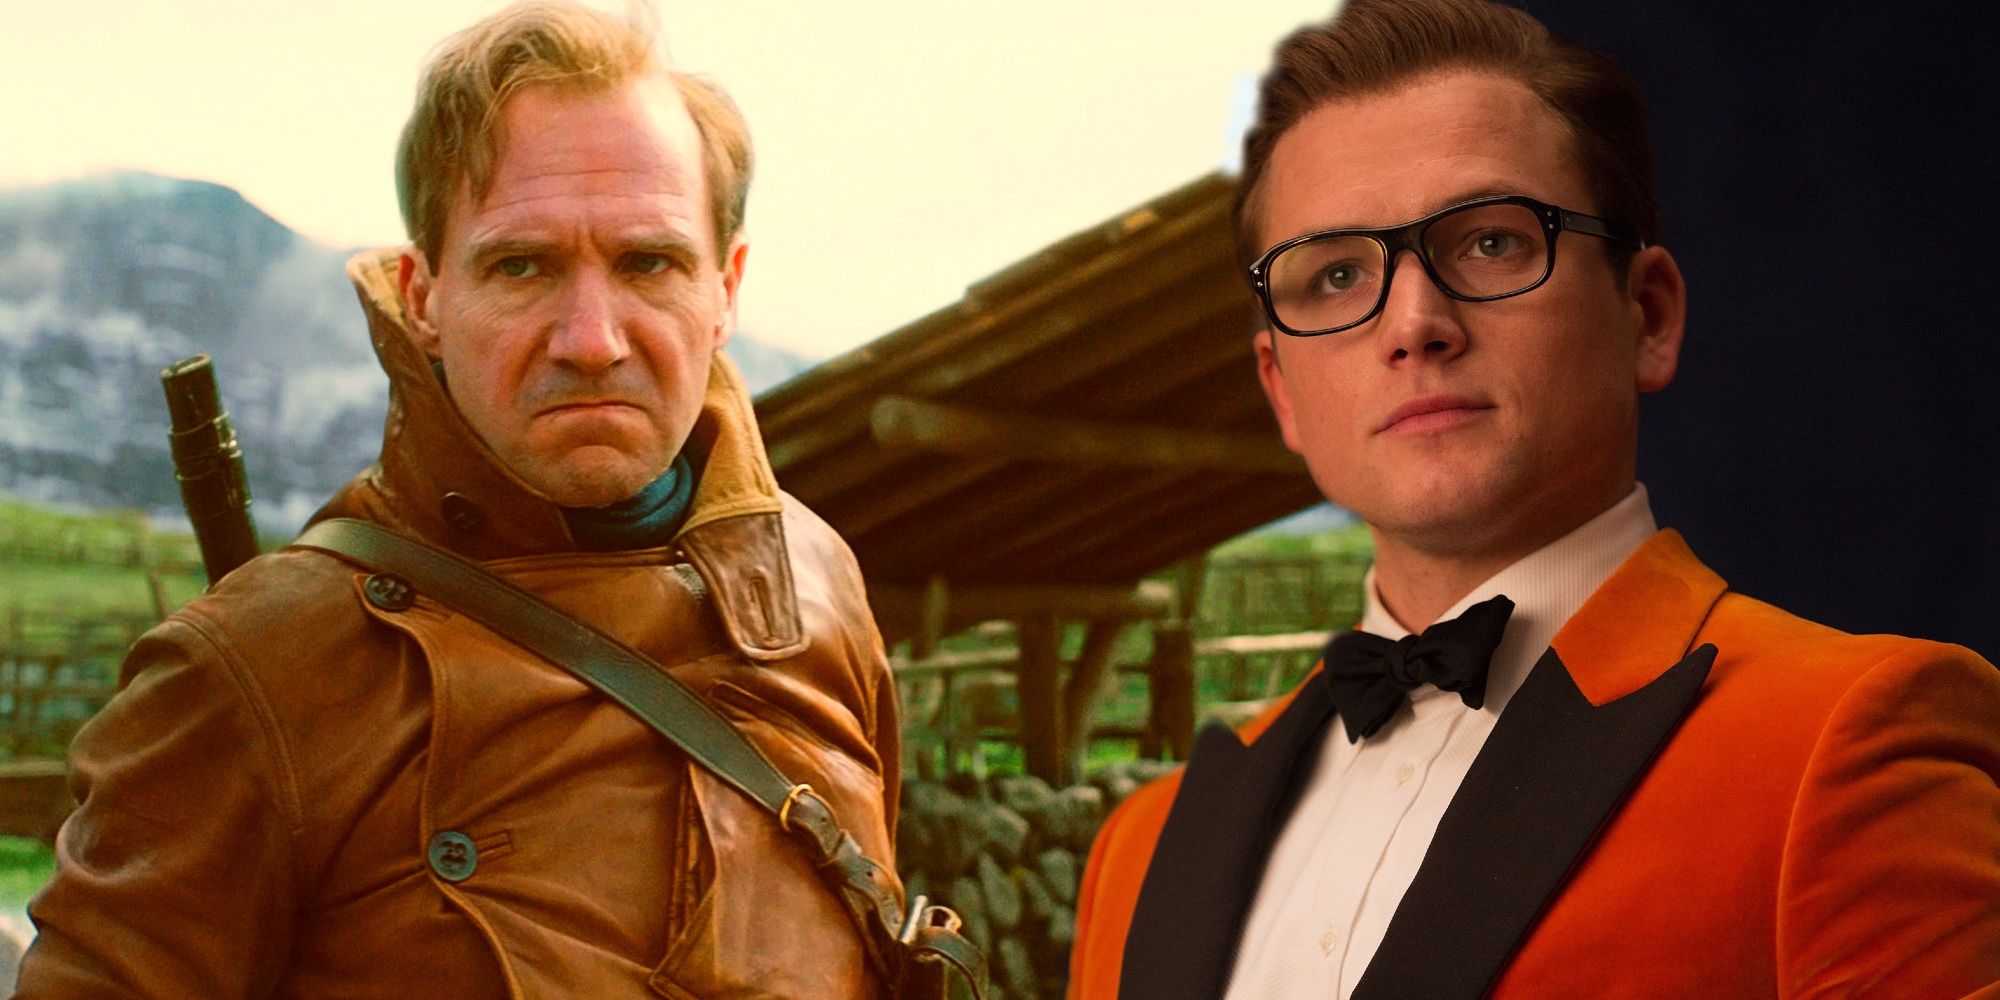 Kingsman 3 Must Avoid Repeating The Golden Circle’s Biggest Retcon